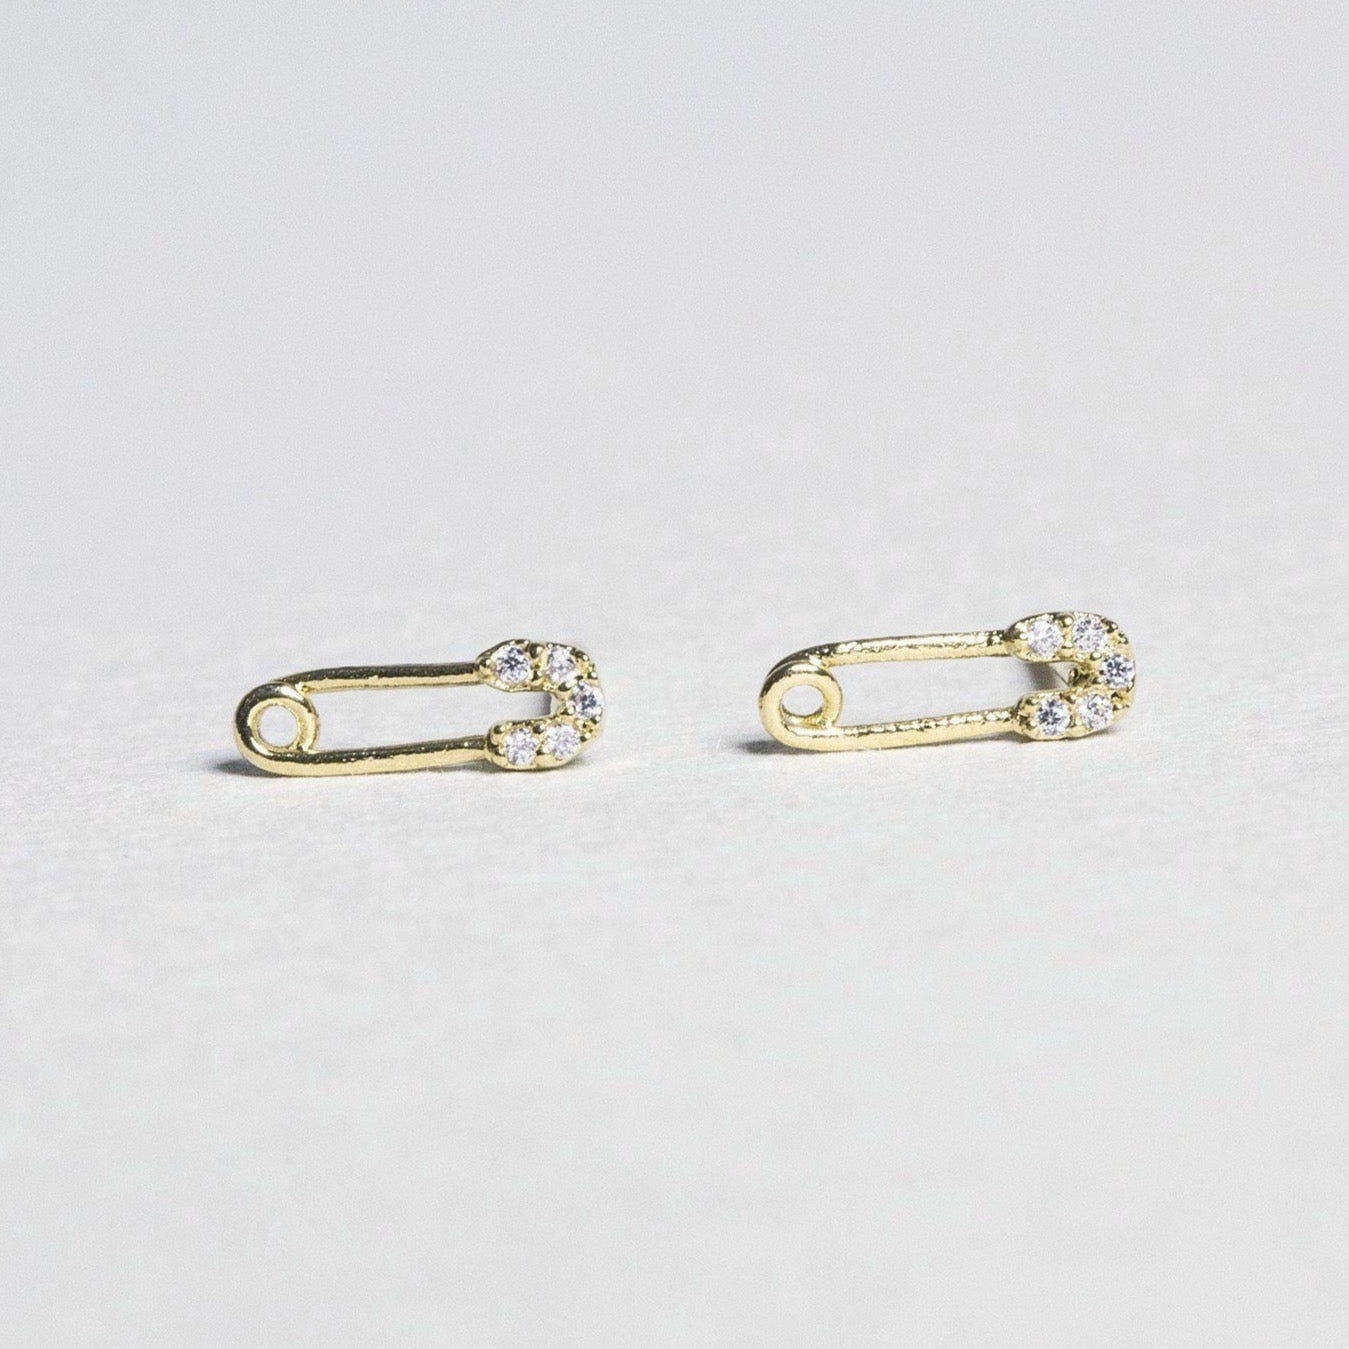 super sweet safety pin earrings witha sprinkle of crystals 